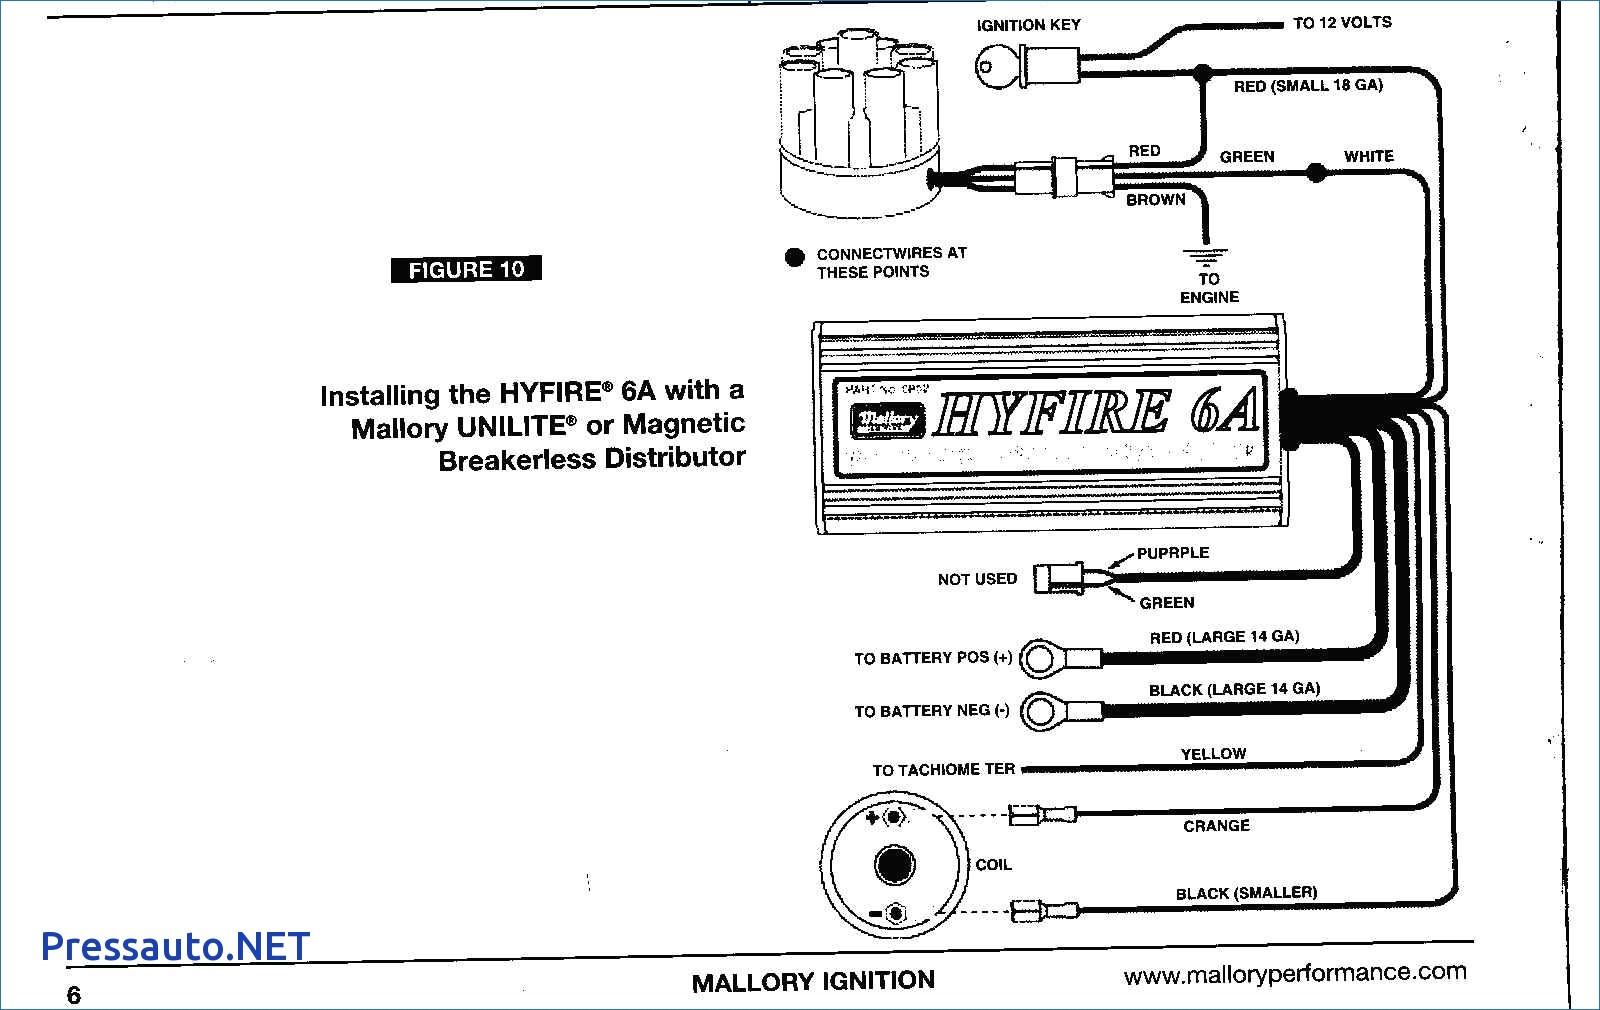 Mallory Ignition Wiring Diagram Harley Life Style By Modernstork Inside